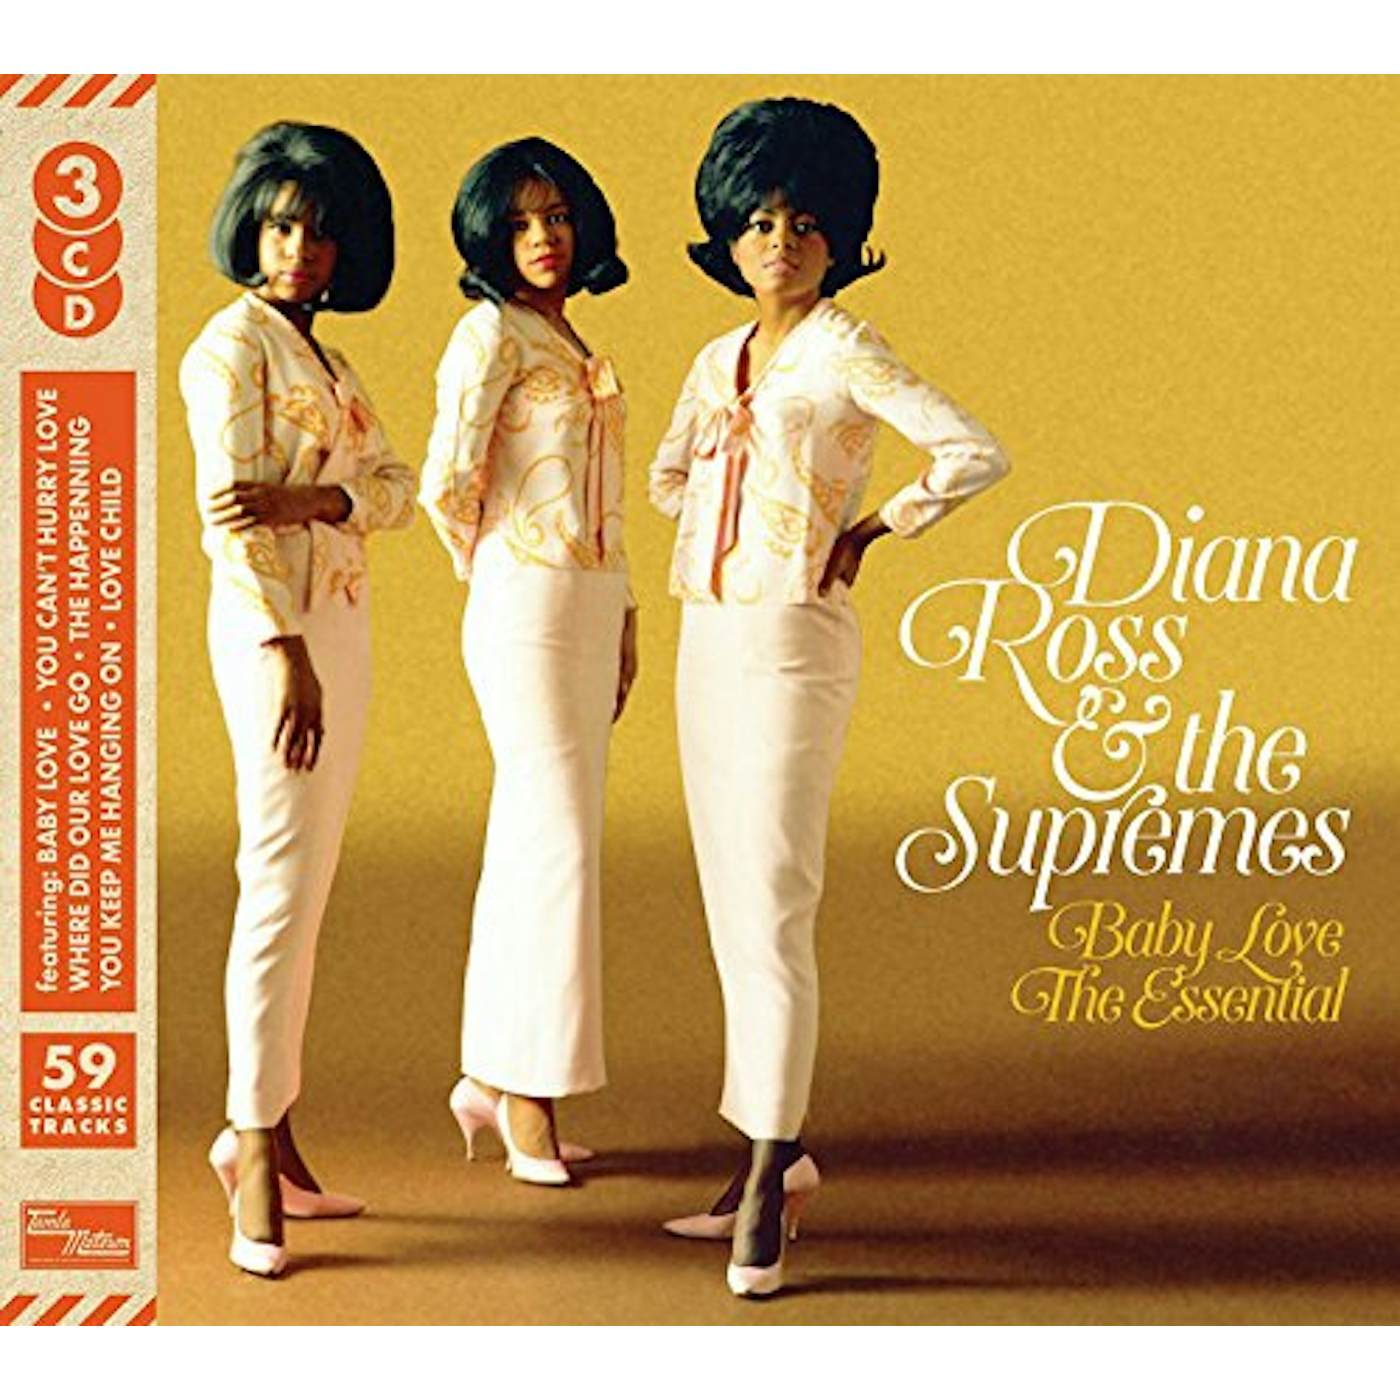 BABY LOVE: ESSENTIAL DIANA ROSS & THE SUPREMES CD